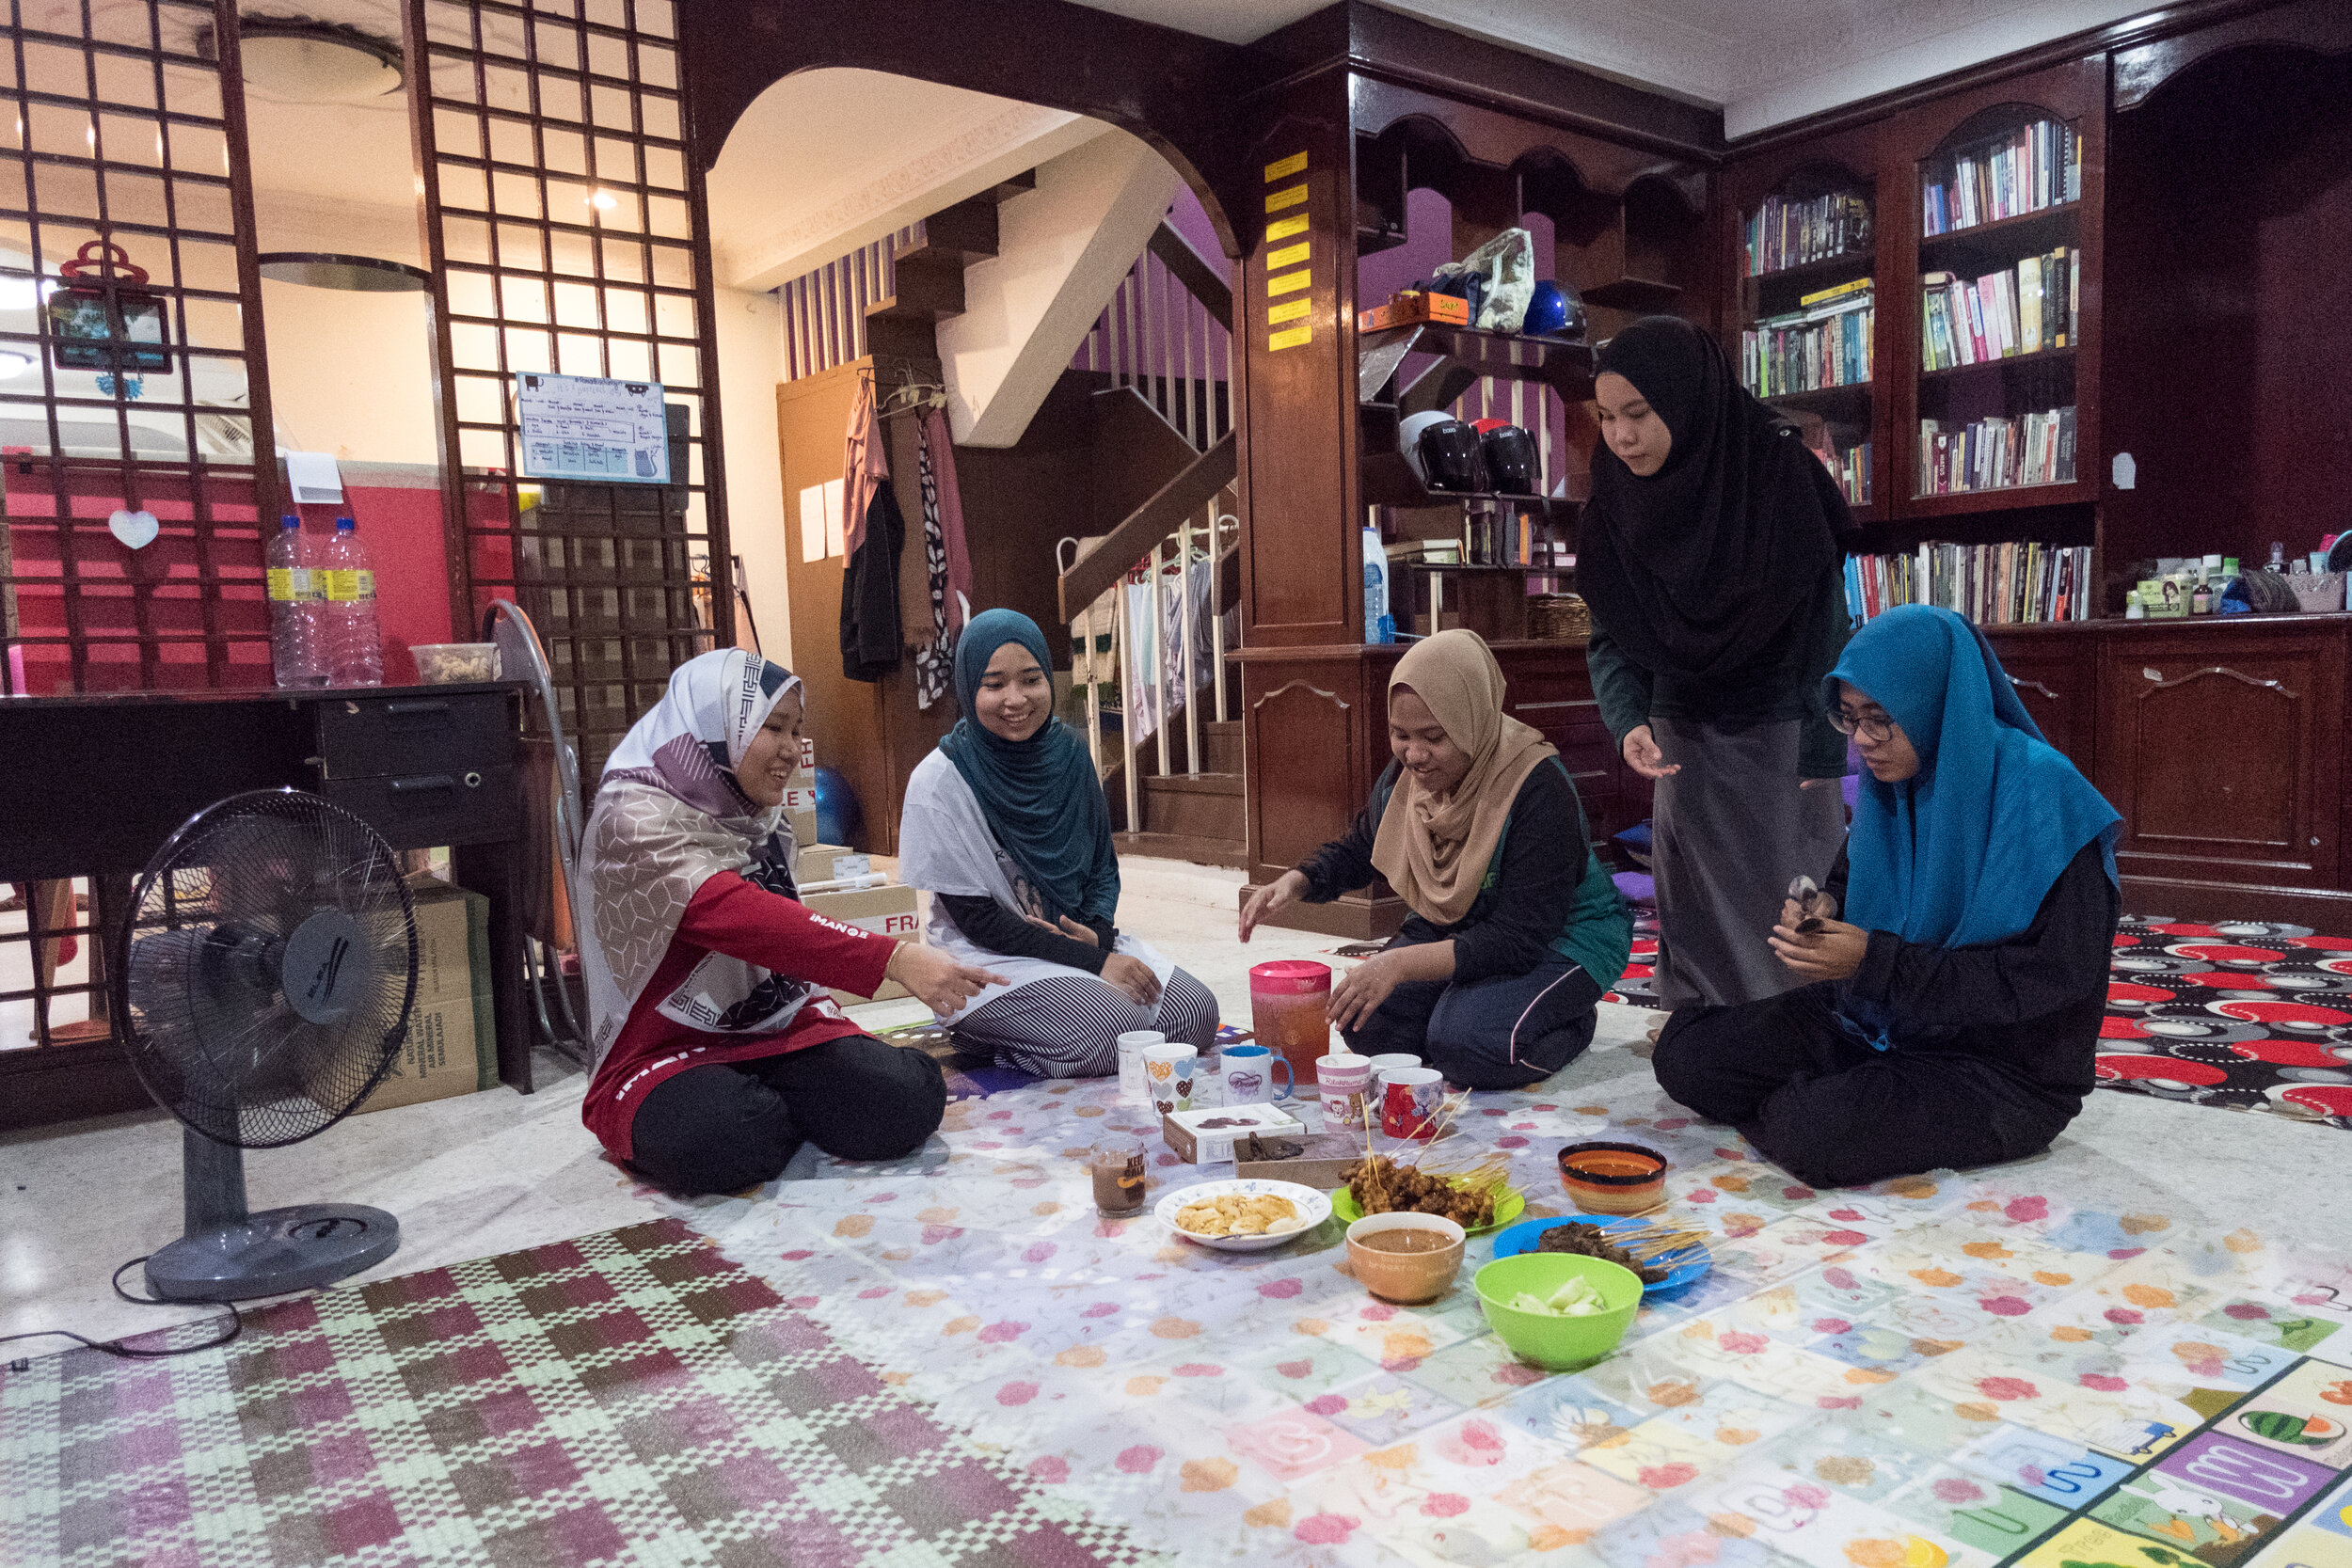  Housemates break fast together on the first day of Ramadan in Kuala Lumpur. It is their first Ramadan away from their families while Malaysia is under a Movement Control Order aimed at fighting against the COVID-19 pandemic. Photo by Alexandra Radu.